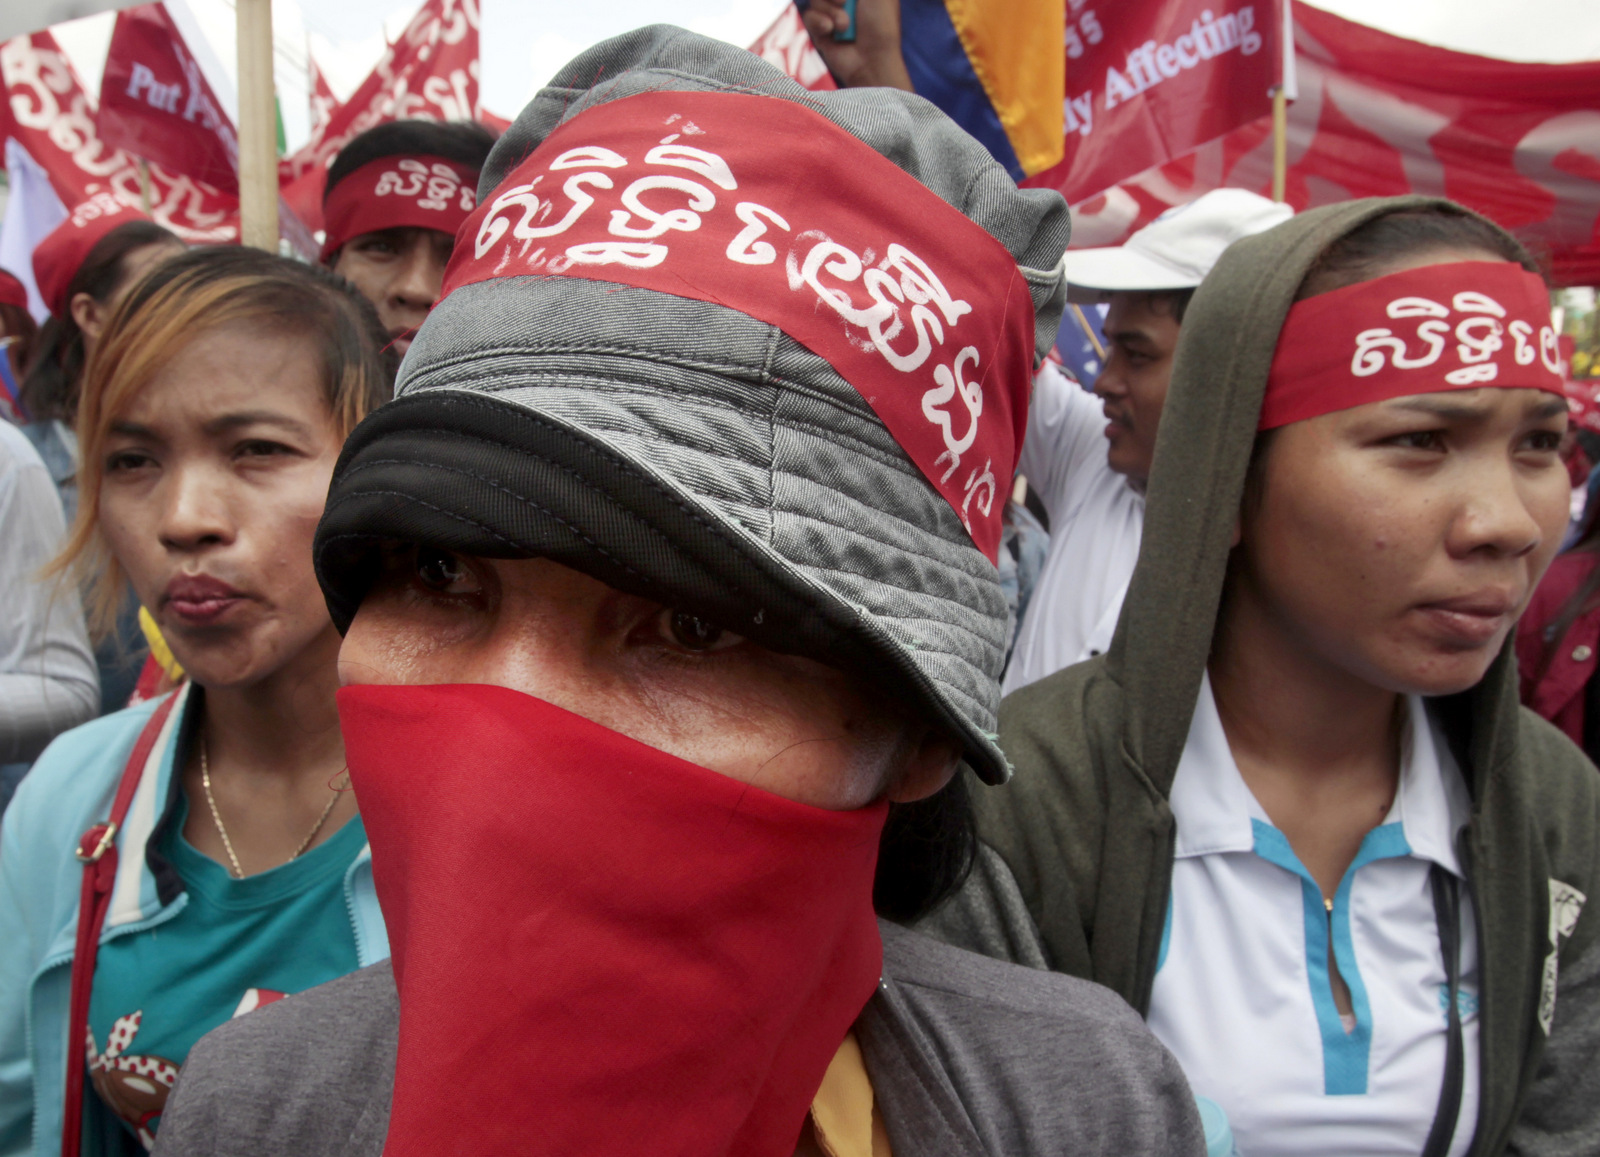 Cambodian garment workers wear headbands reading "Our rights" during a gathering to mark May Day at a blocked street near National Assembly in Phnom Penh, Cambodia, Monday, May 1, 2017. More than 1,000 workers staged a rally under a topic of "Living Wage Rights" and demanded a better working condition. 